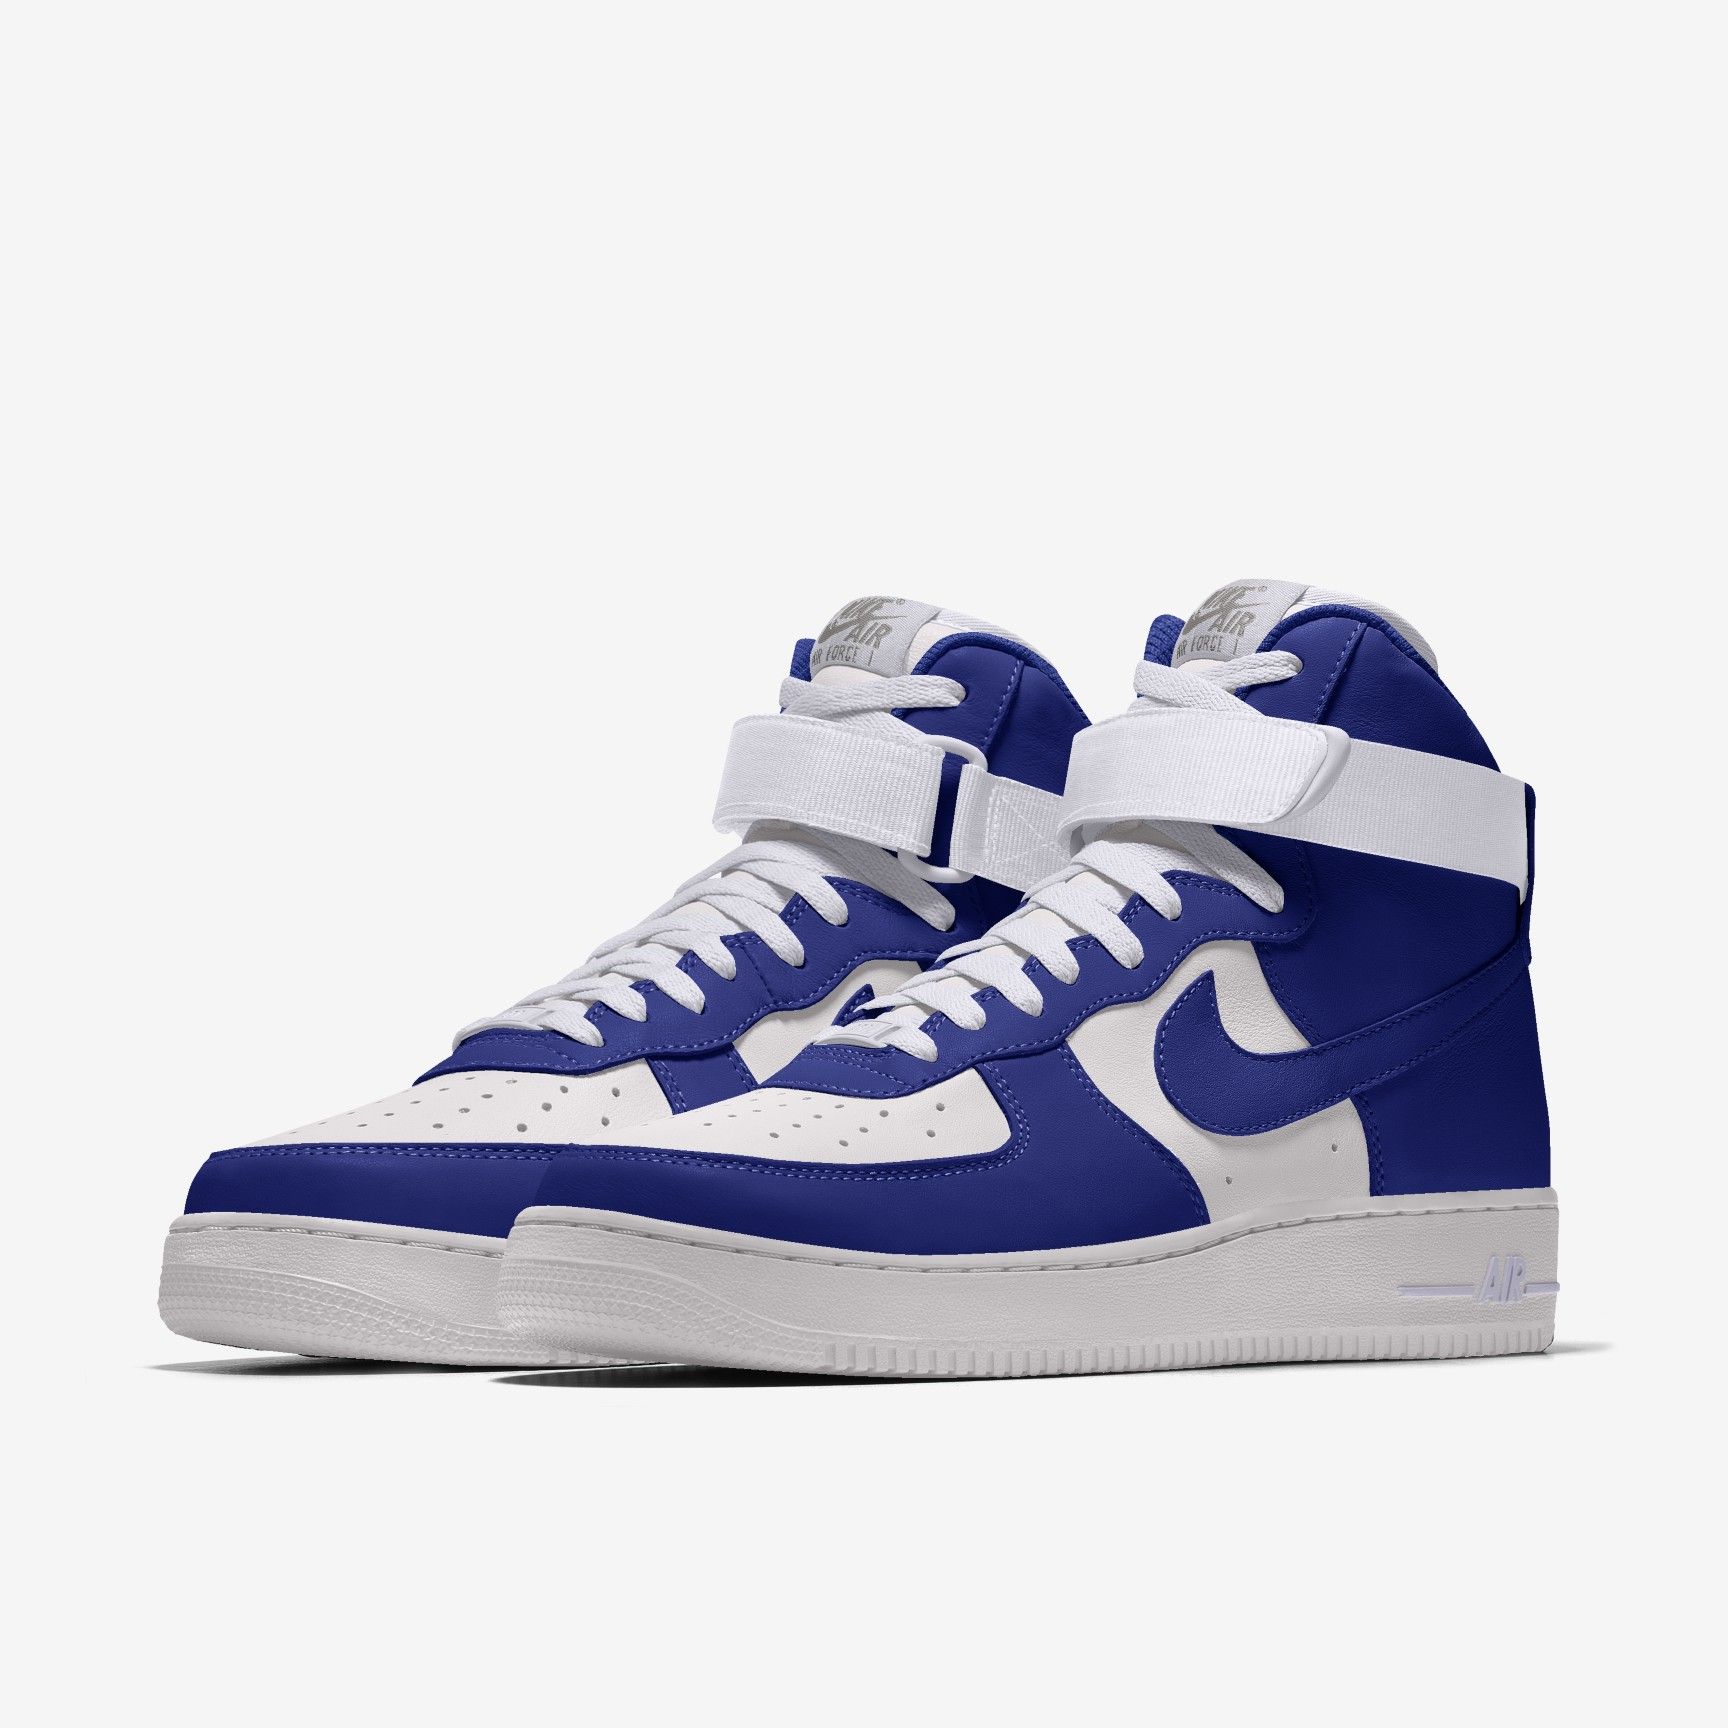  Nike Air Force 1 High By You - Royal Blue 